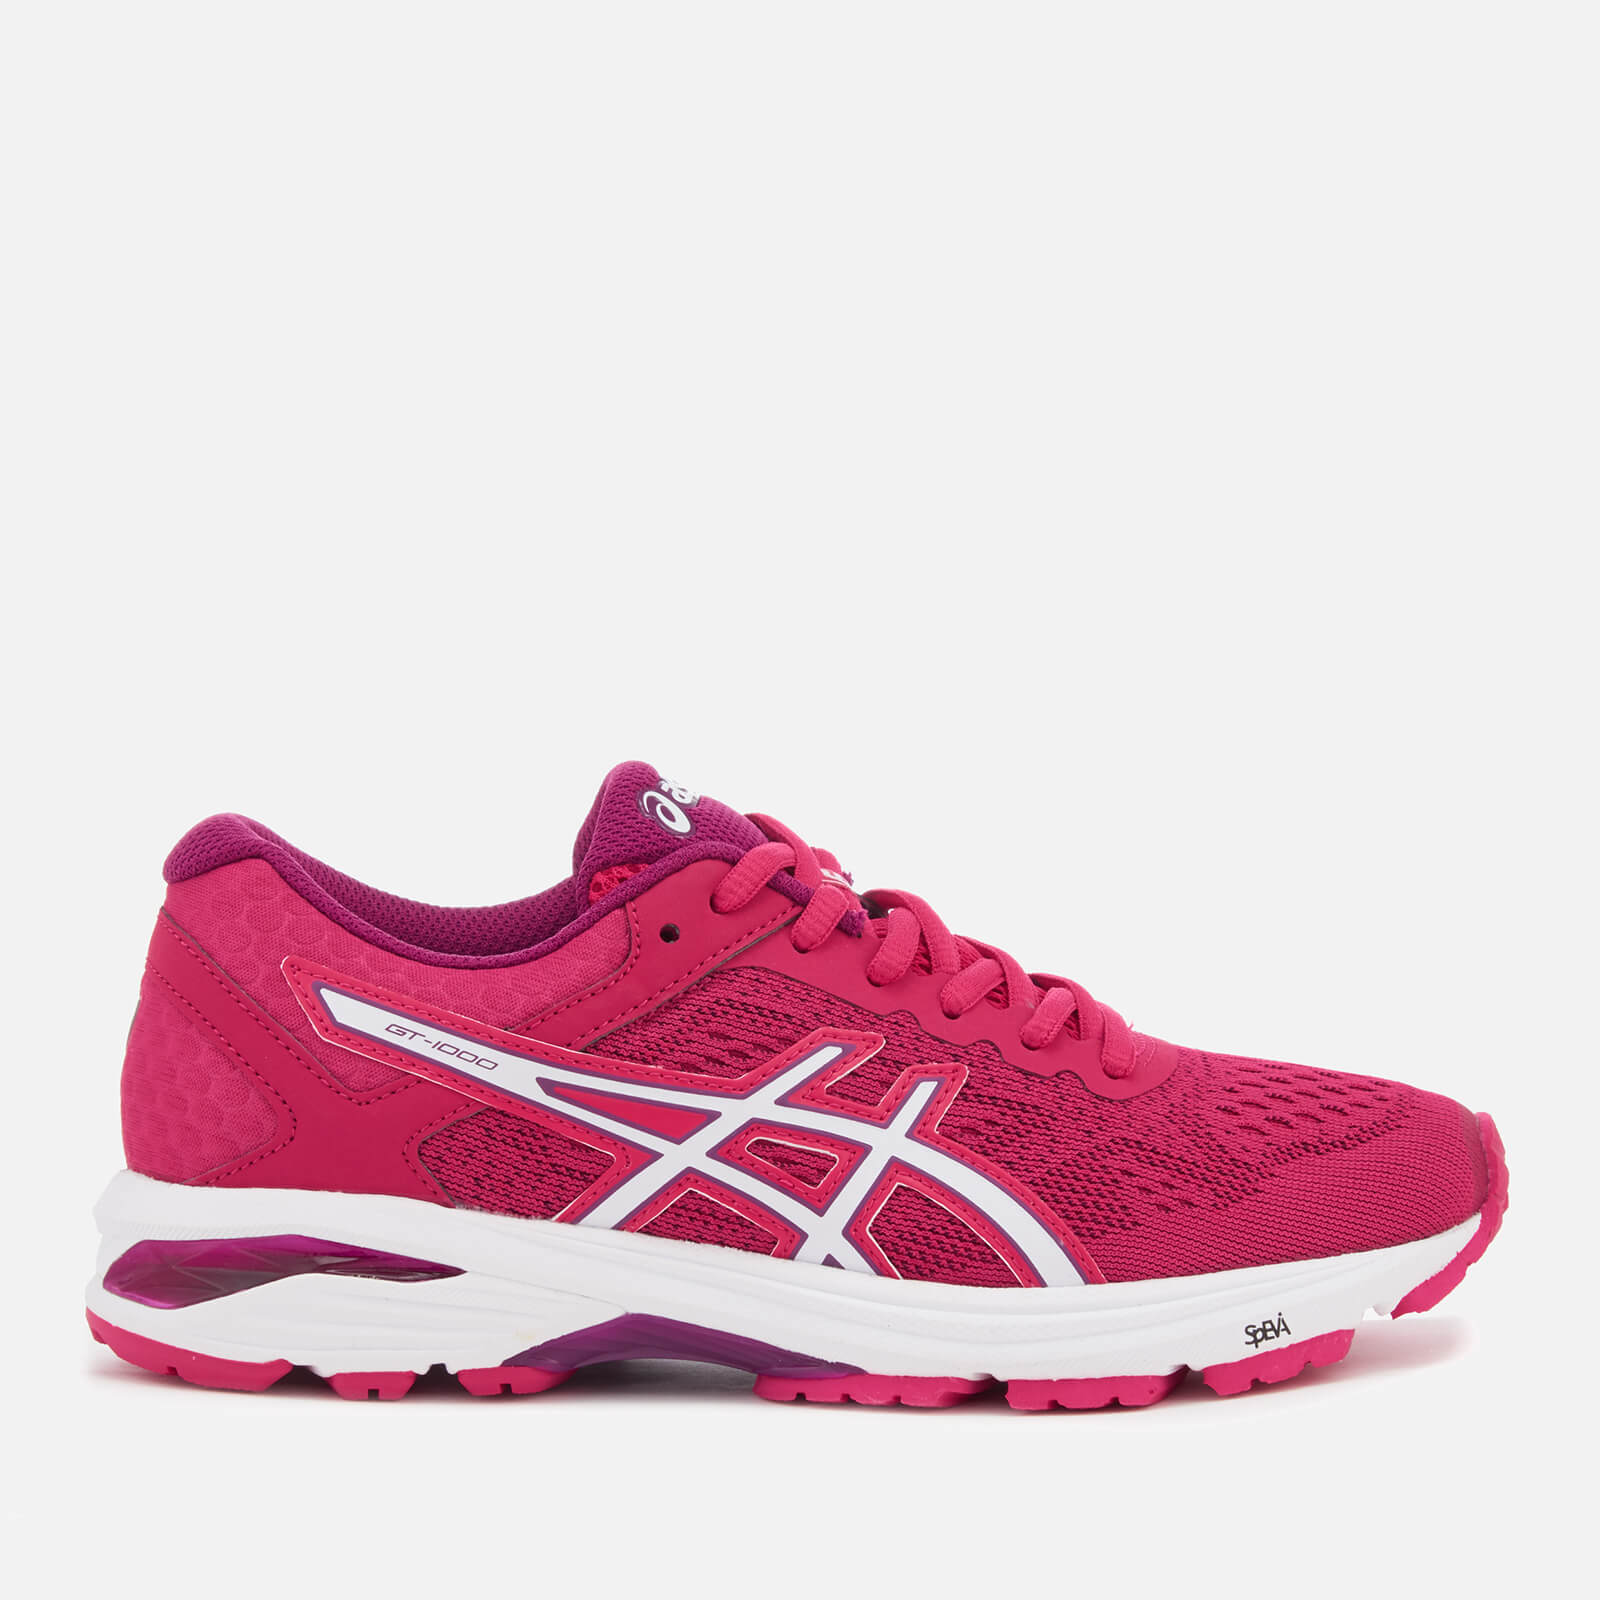 asics neon trainers Shop Clothing 